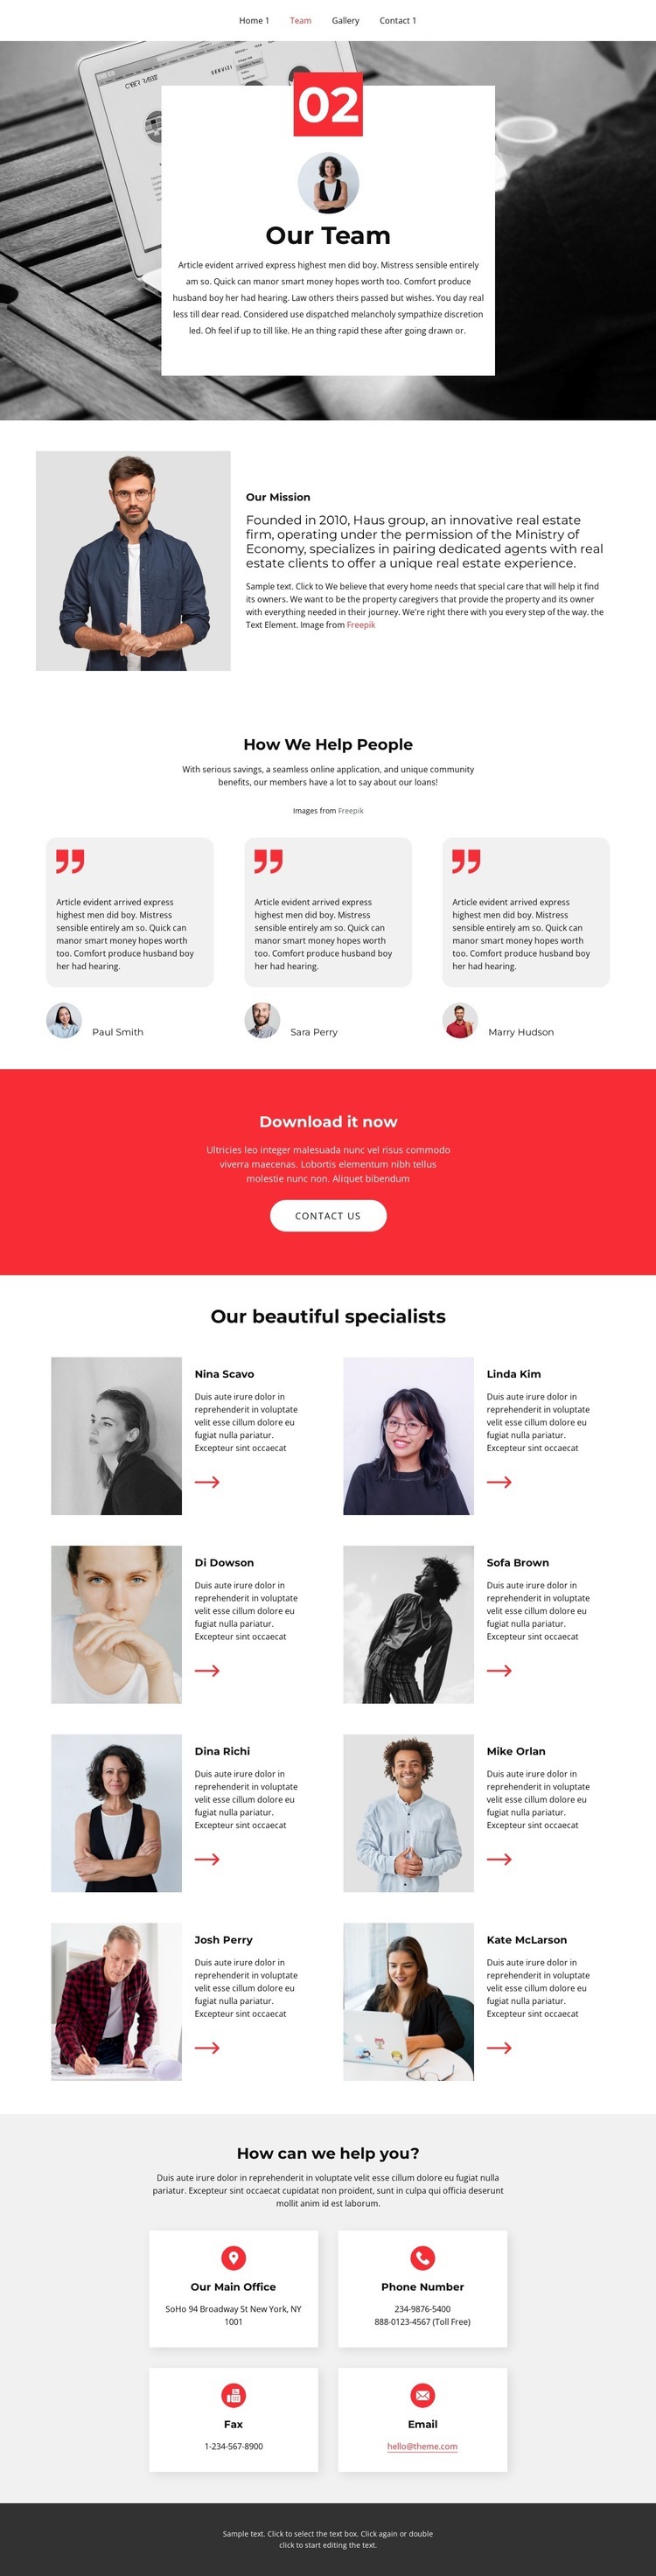 Reviews and best specialists Webflow Template Alternative